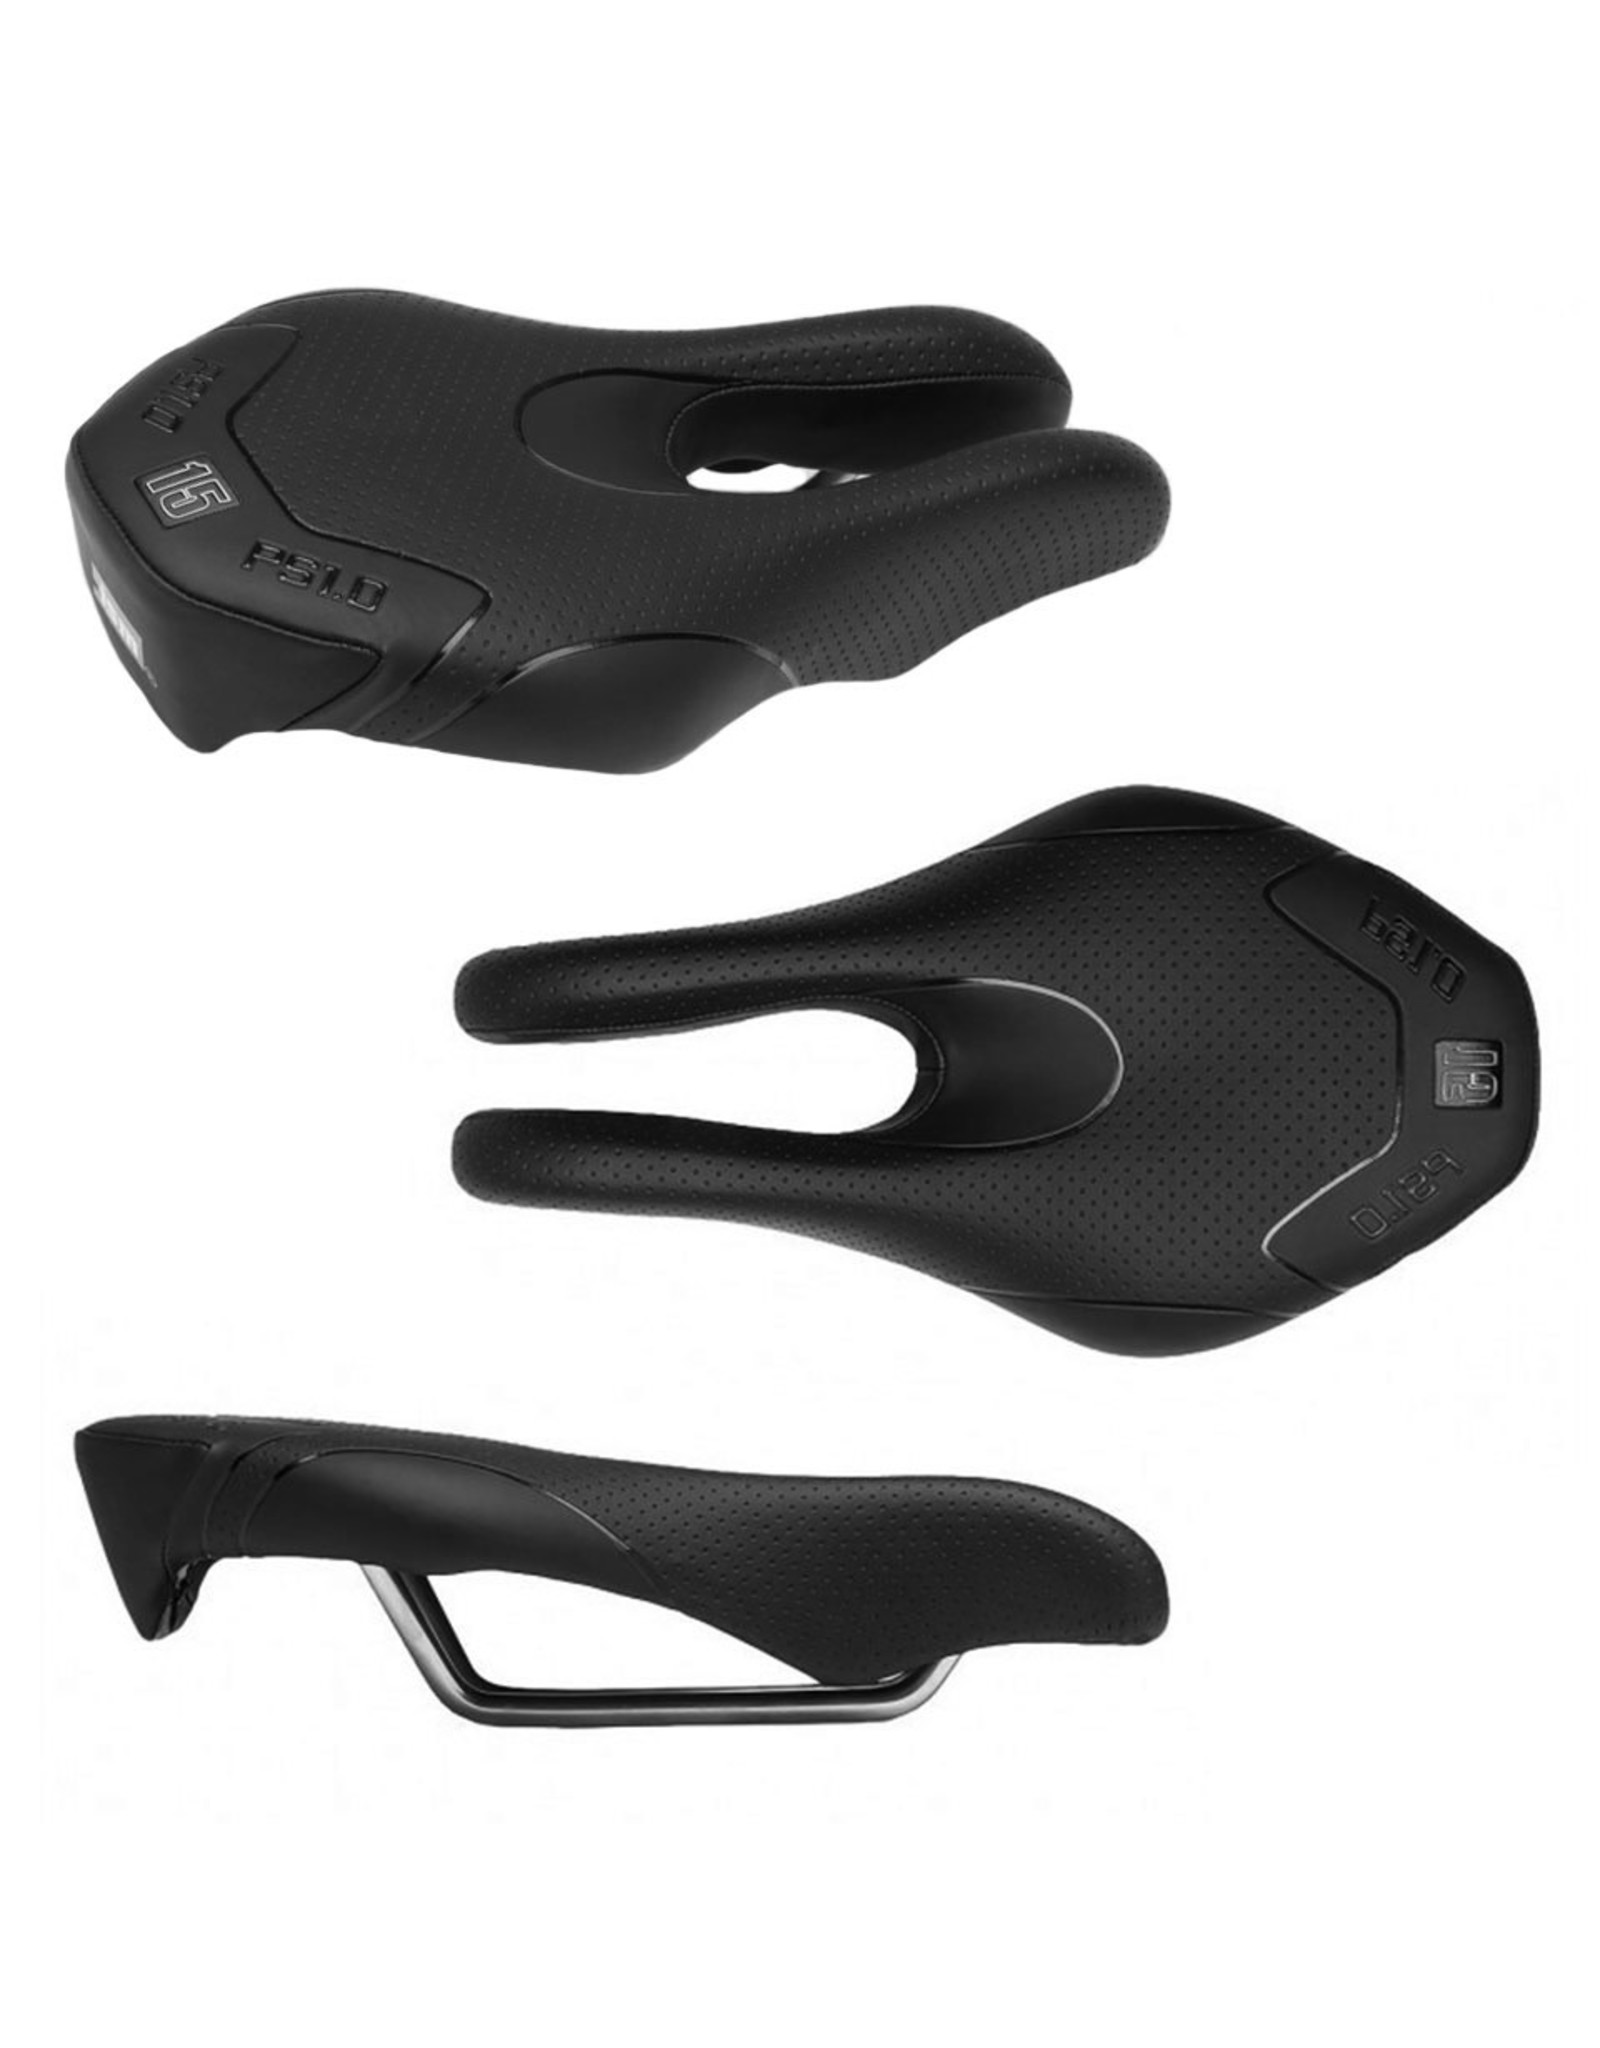 ISM ISM PS Saddle